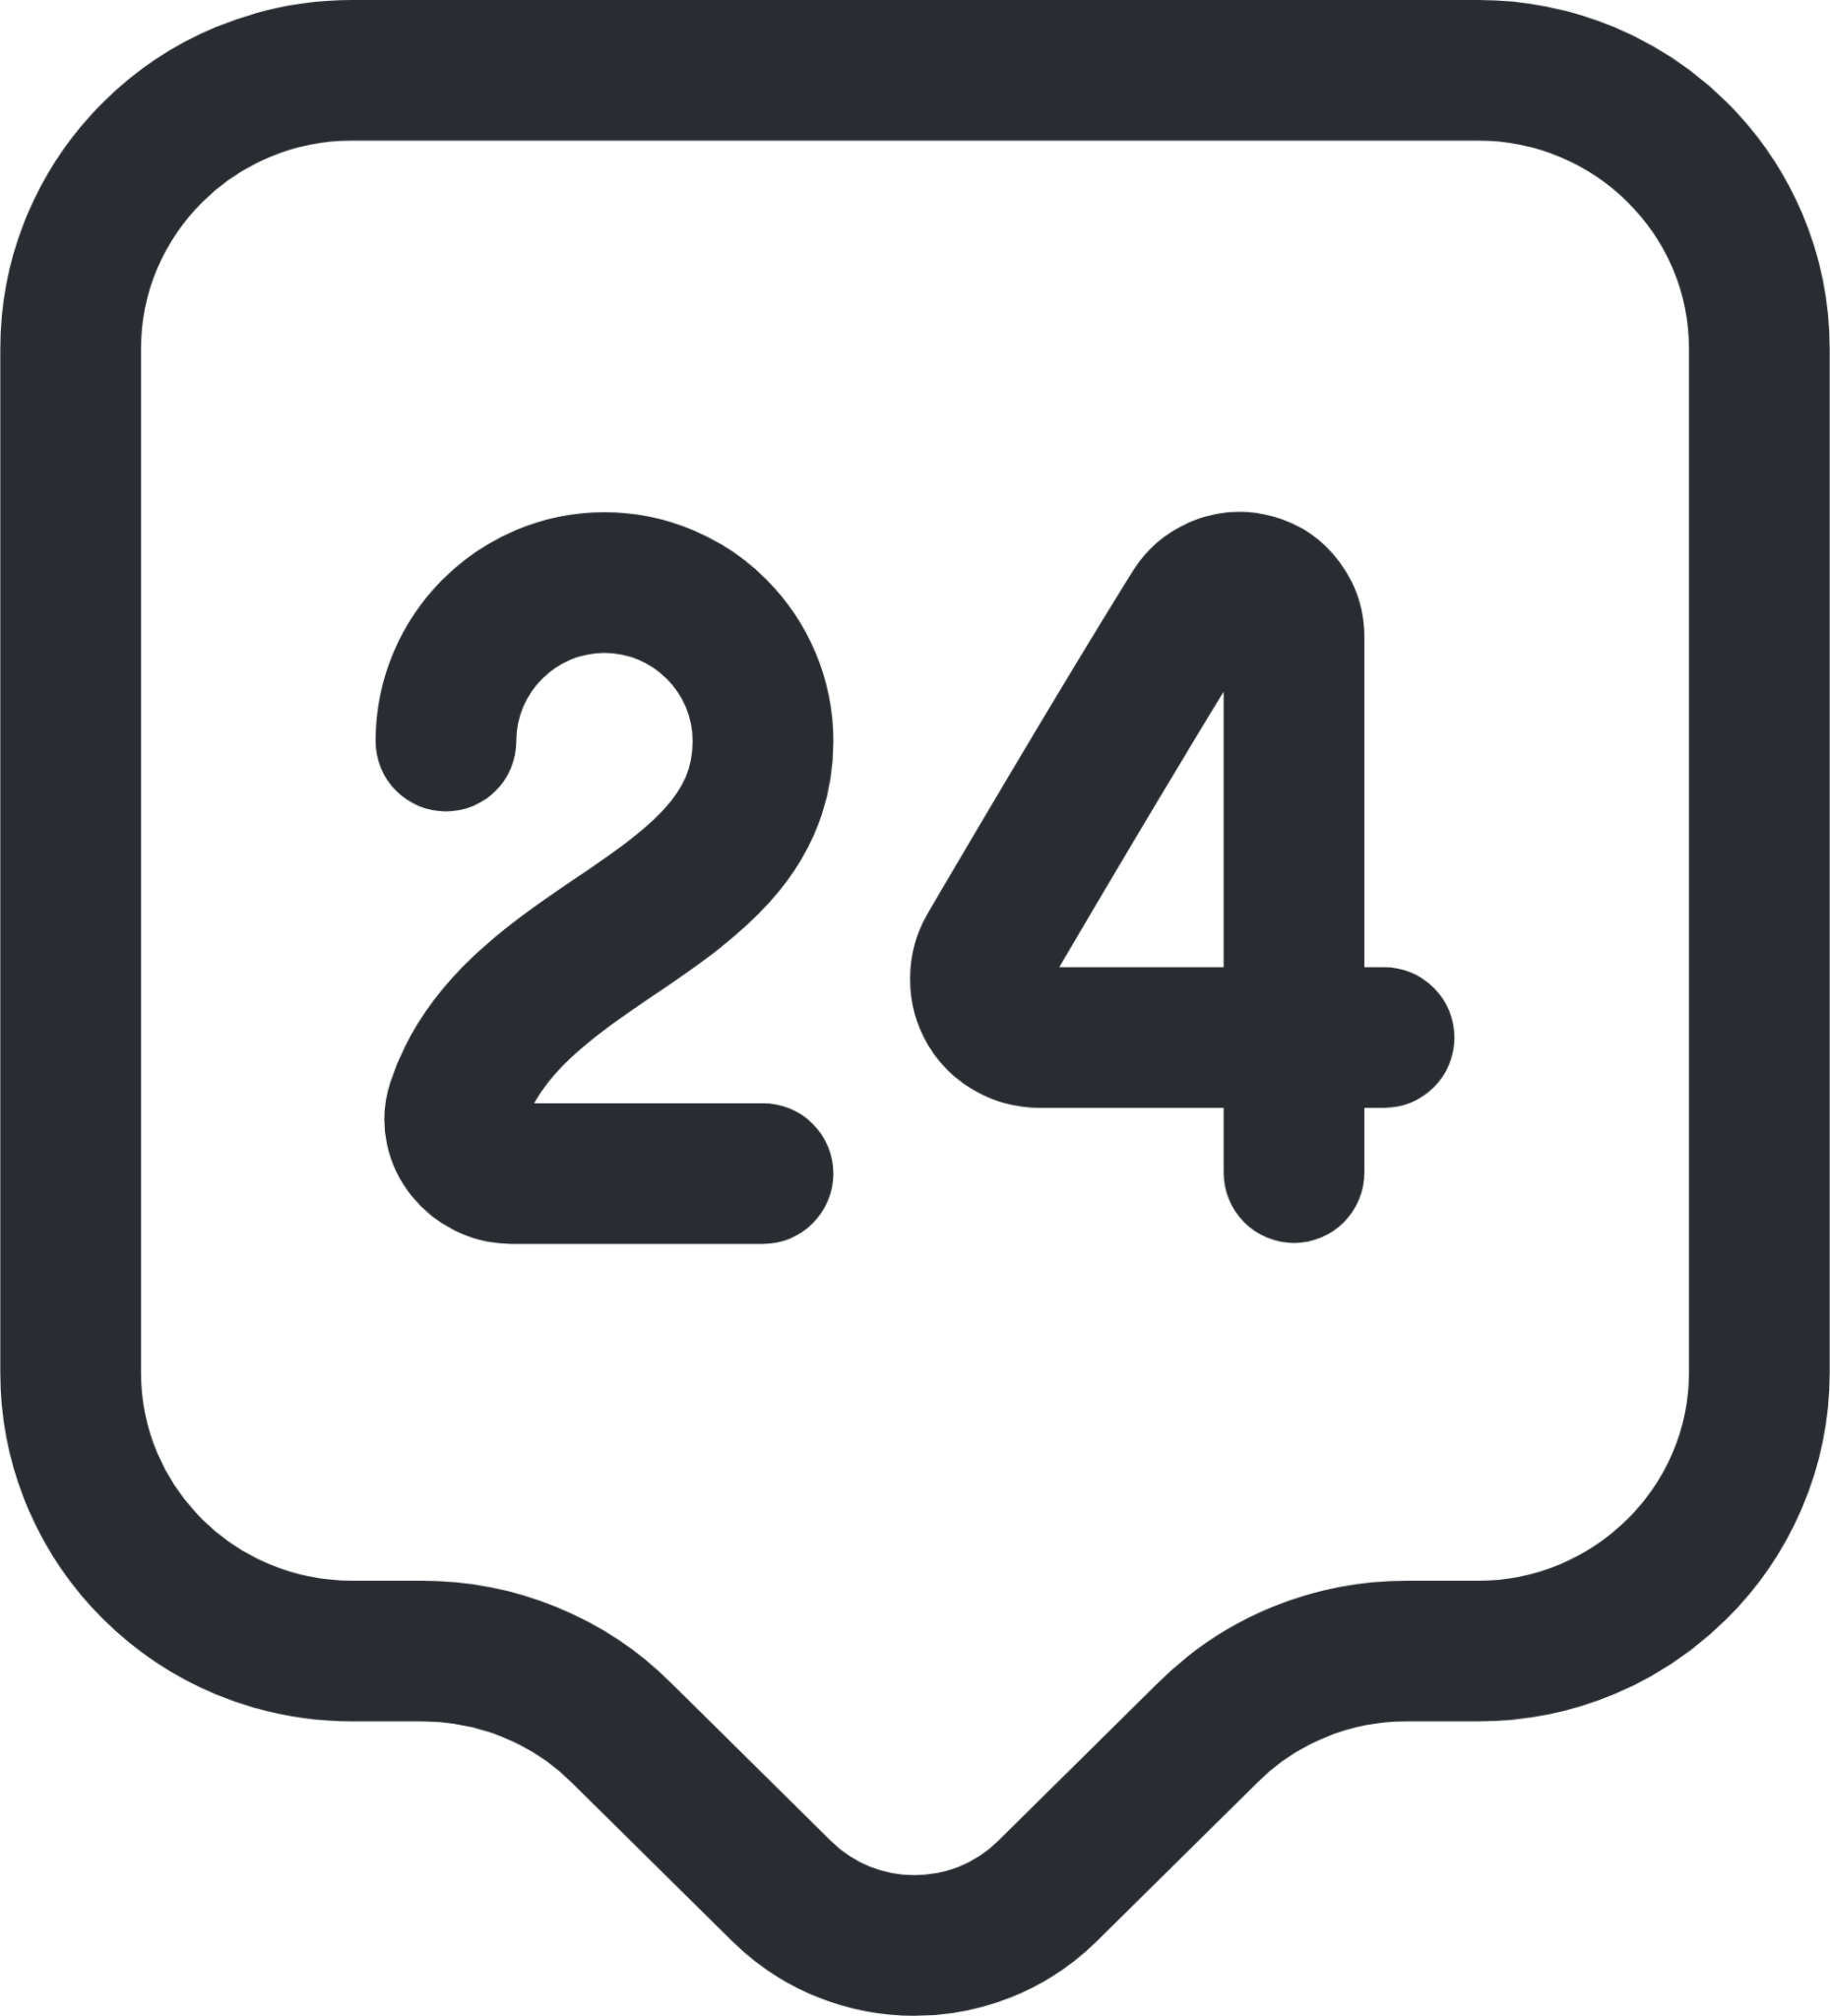 24 support icon